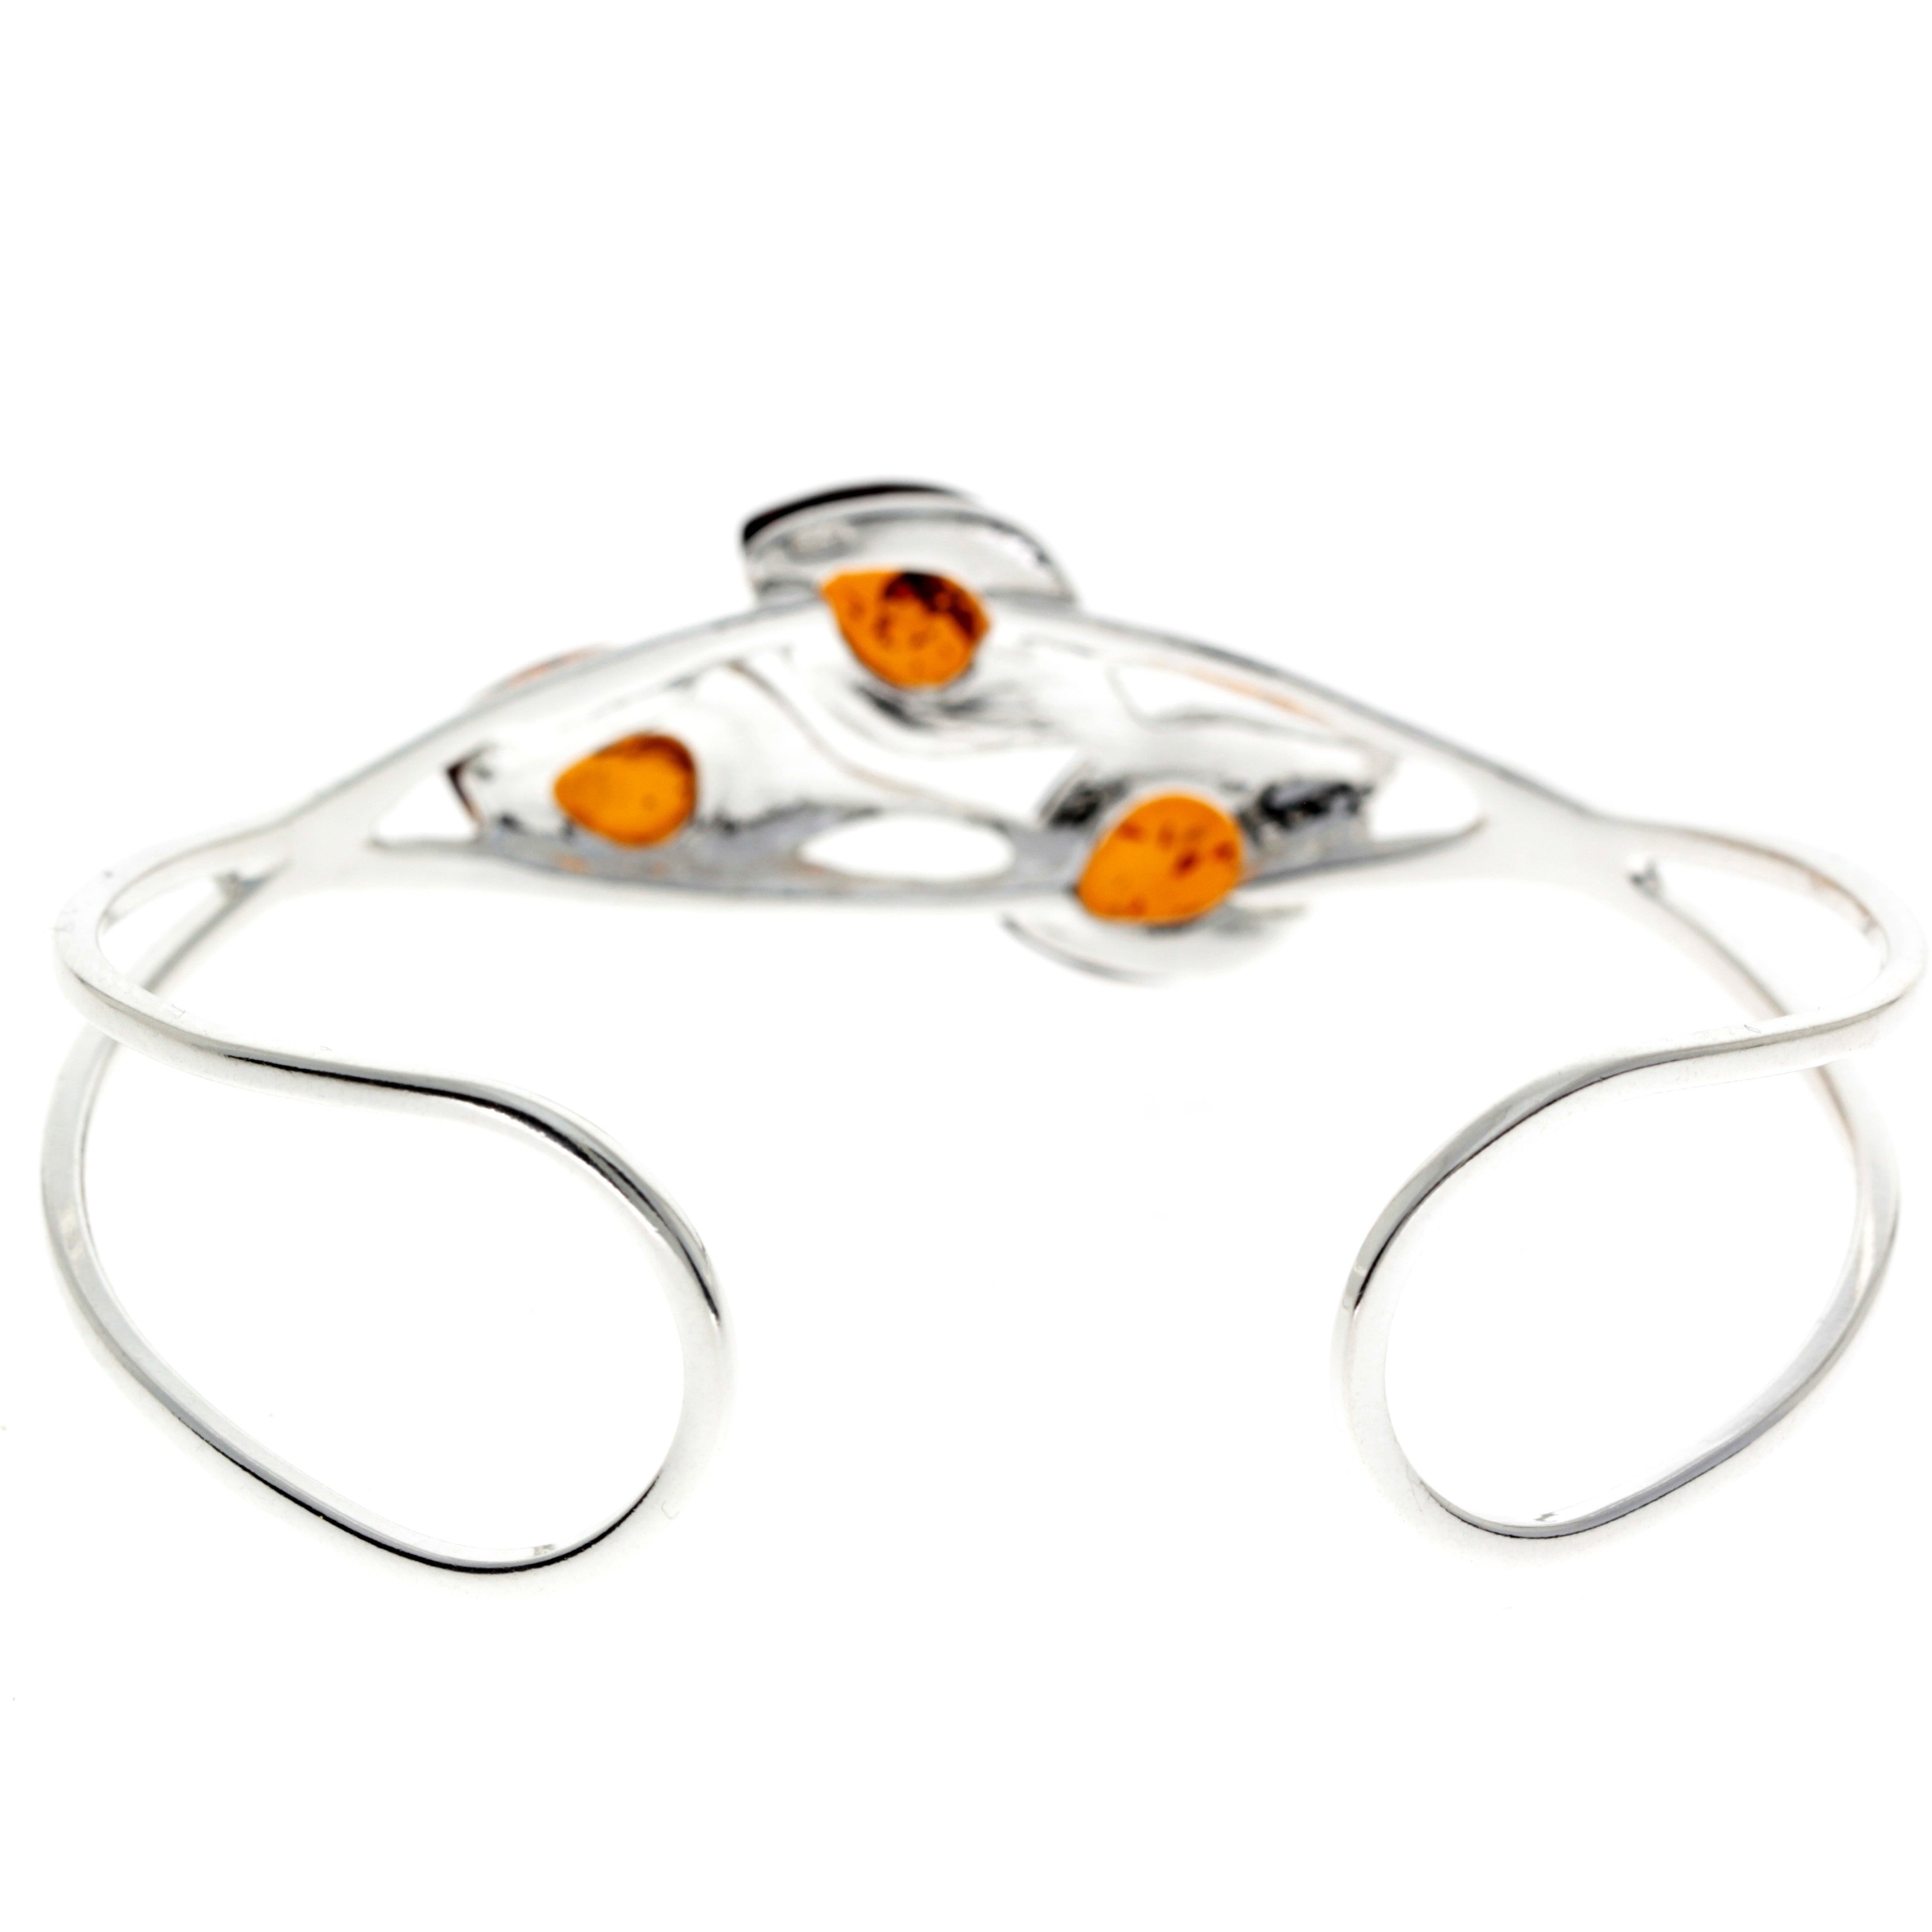 Beautiful Designer Silver Bangle with 3 Baltic Amber Stones - BL0054